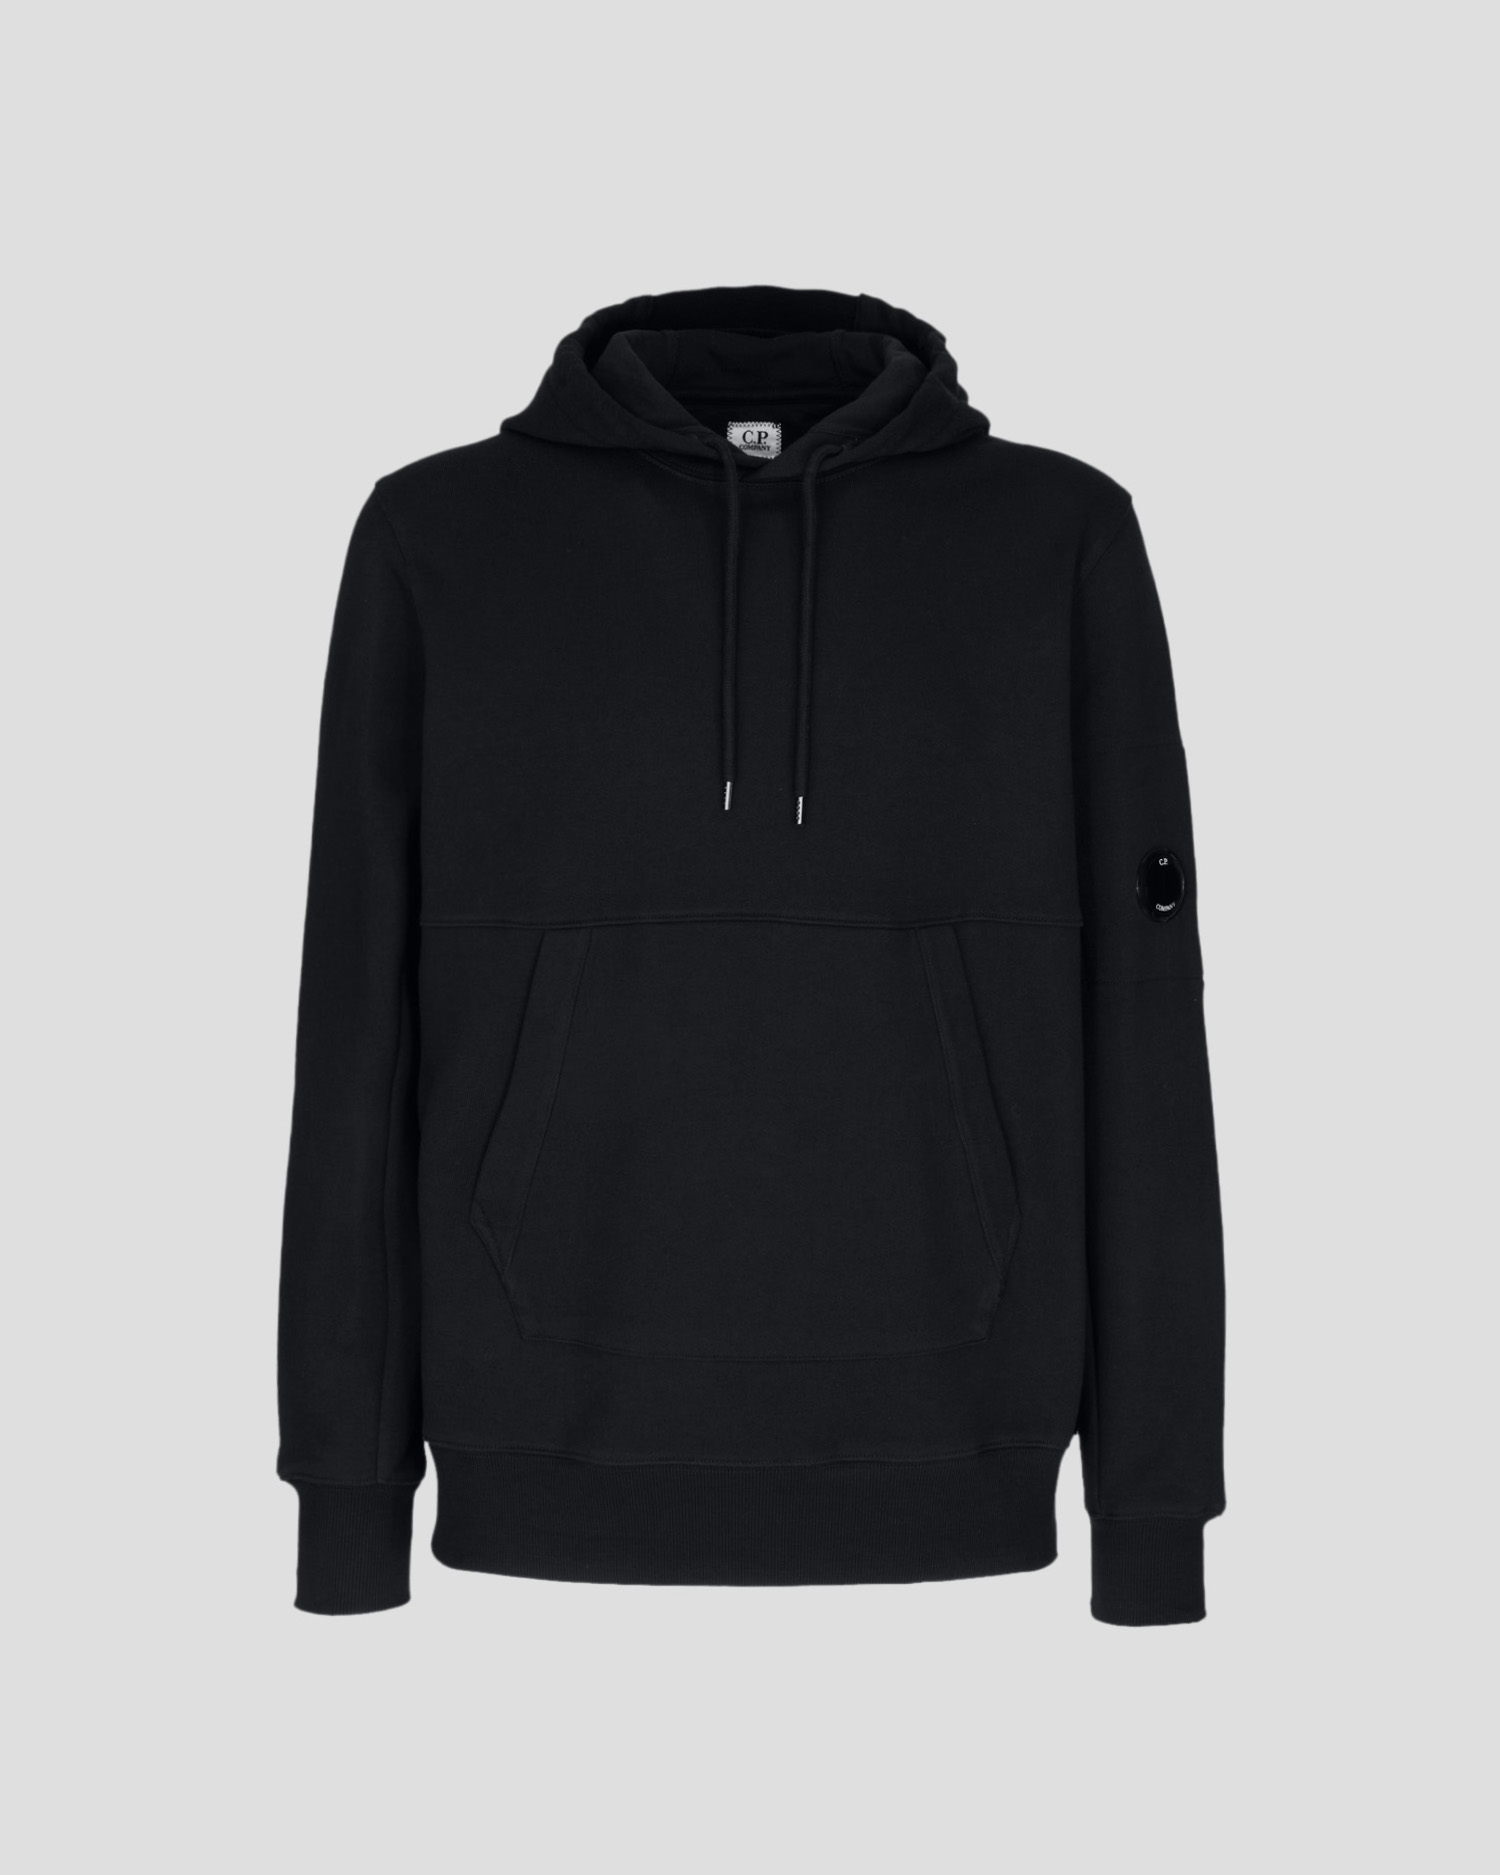 sudadera capucha hoodie negro black cpcompany 13CMSS023A005086W669 dolcevitaboutique.